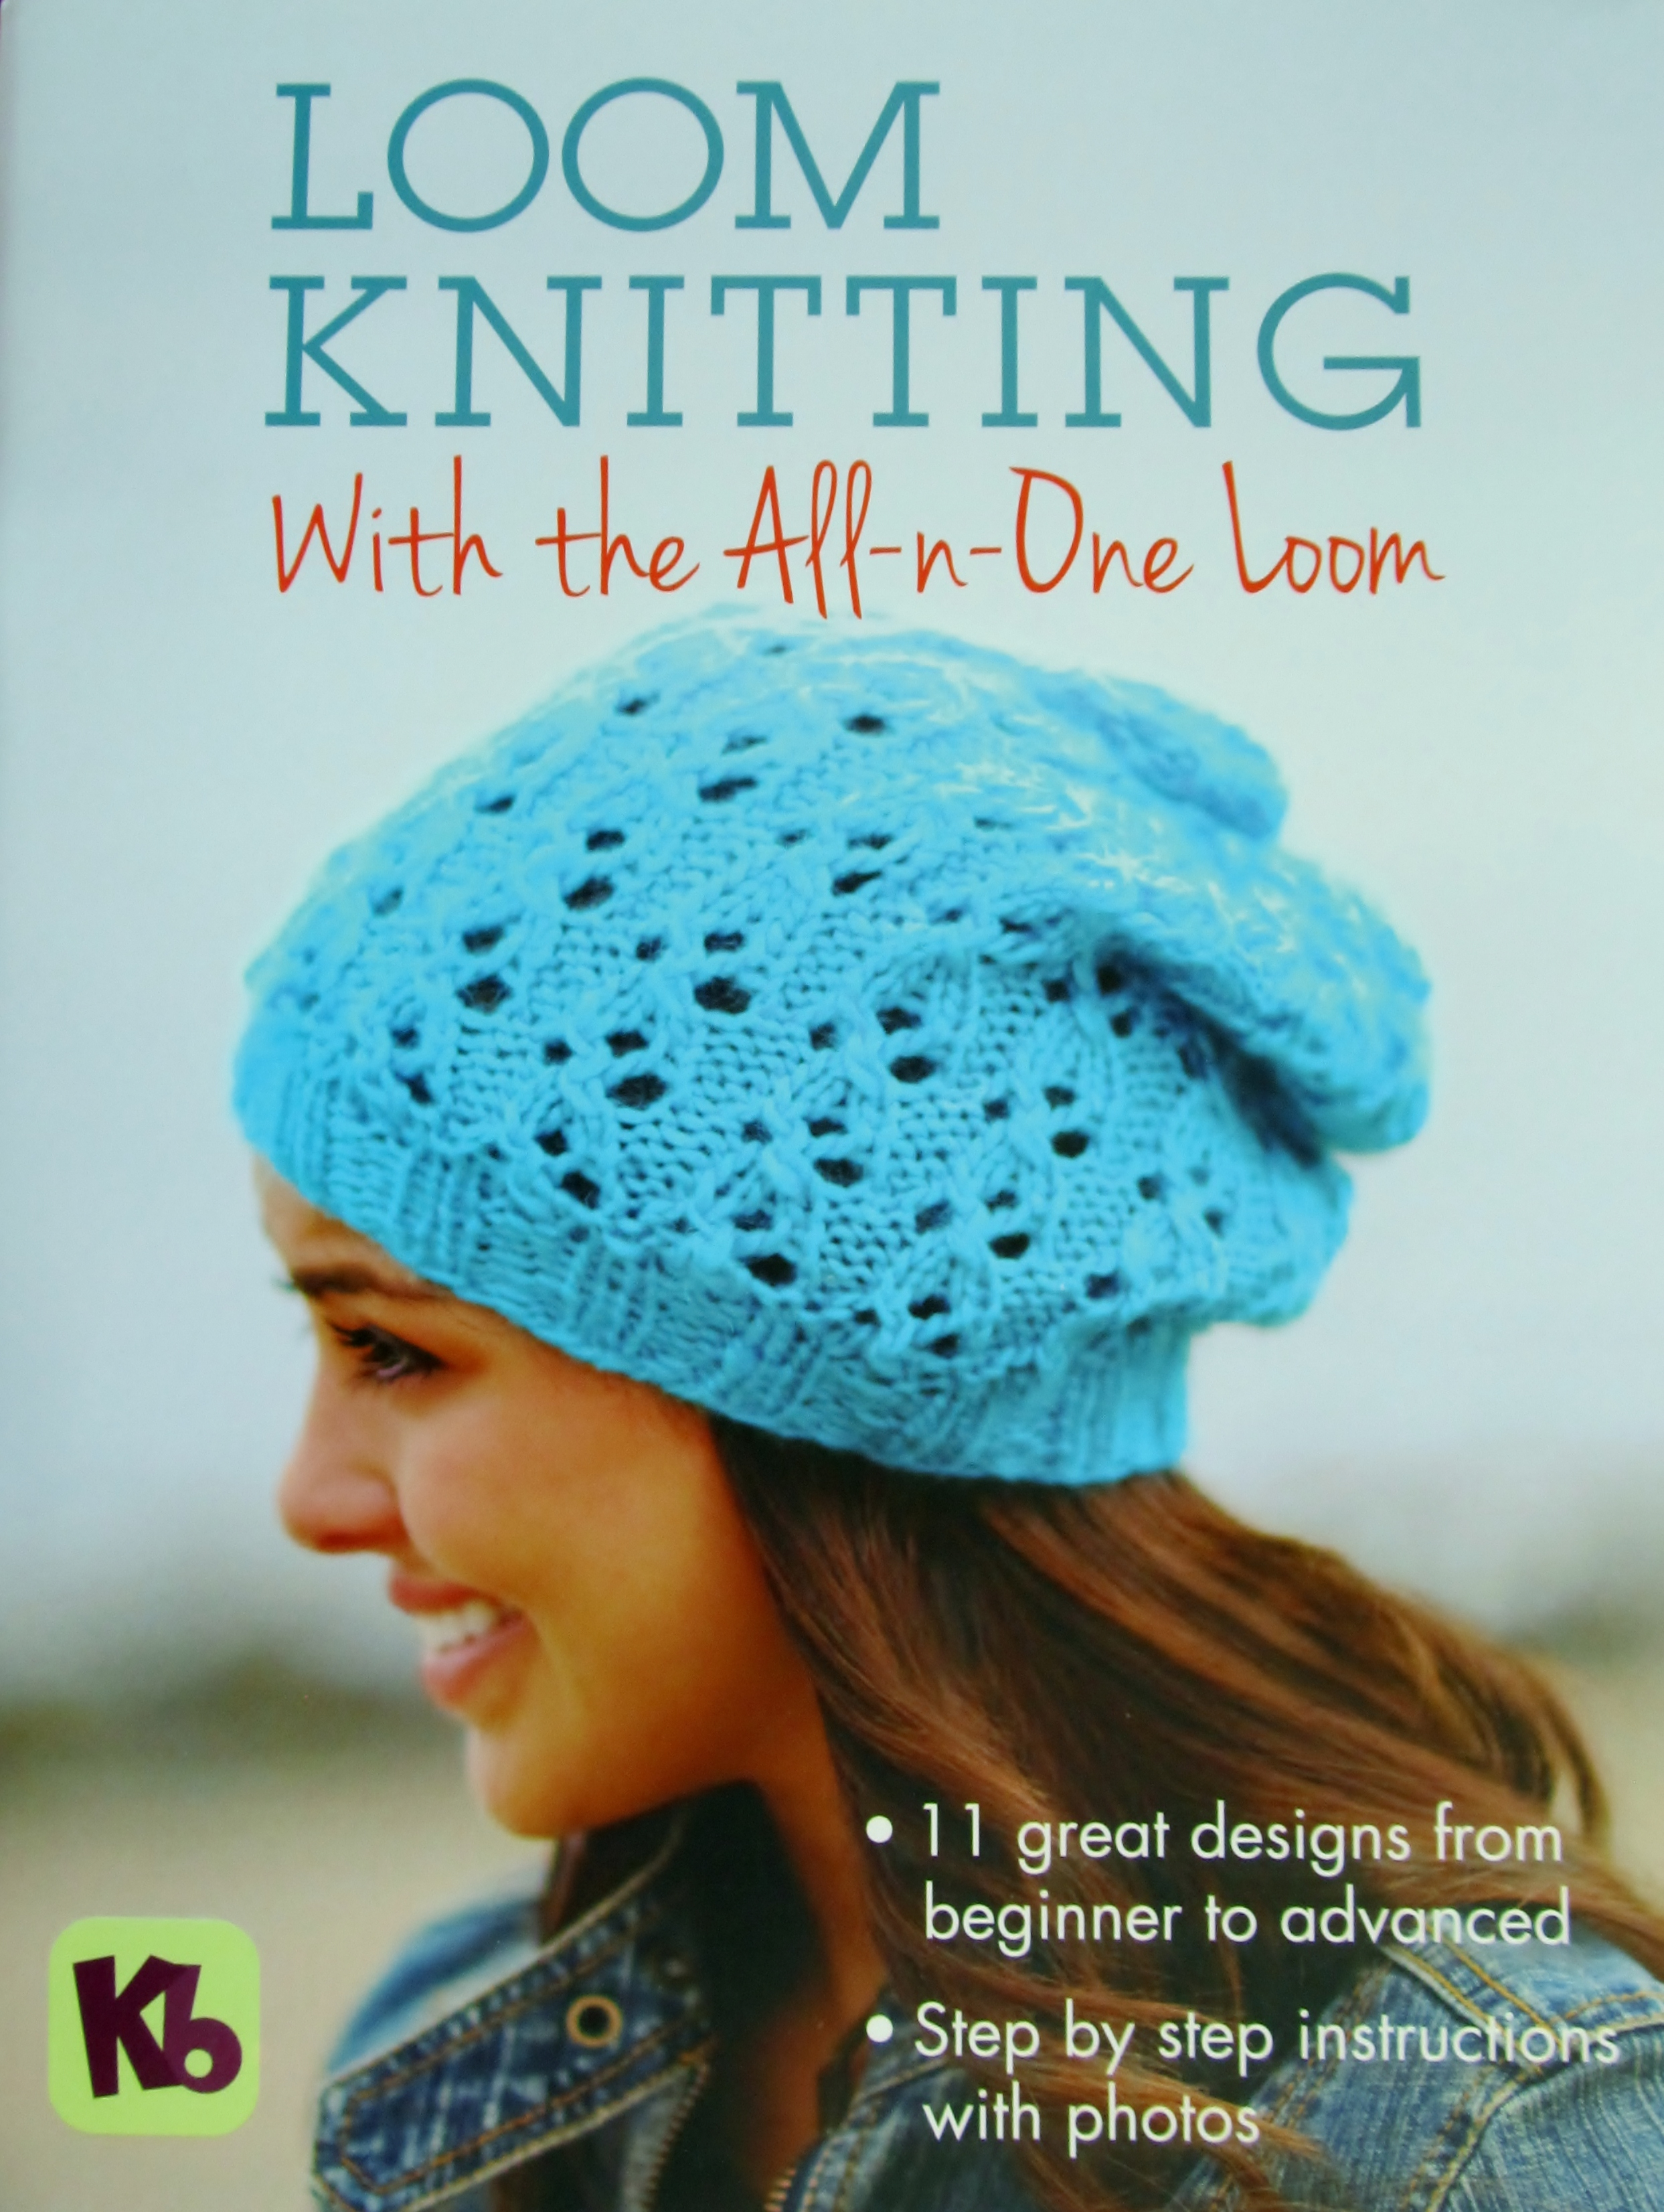 Round Loom Knitting Patterns Download Loom Knitting With The All N One Book Guppygirl